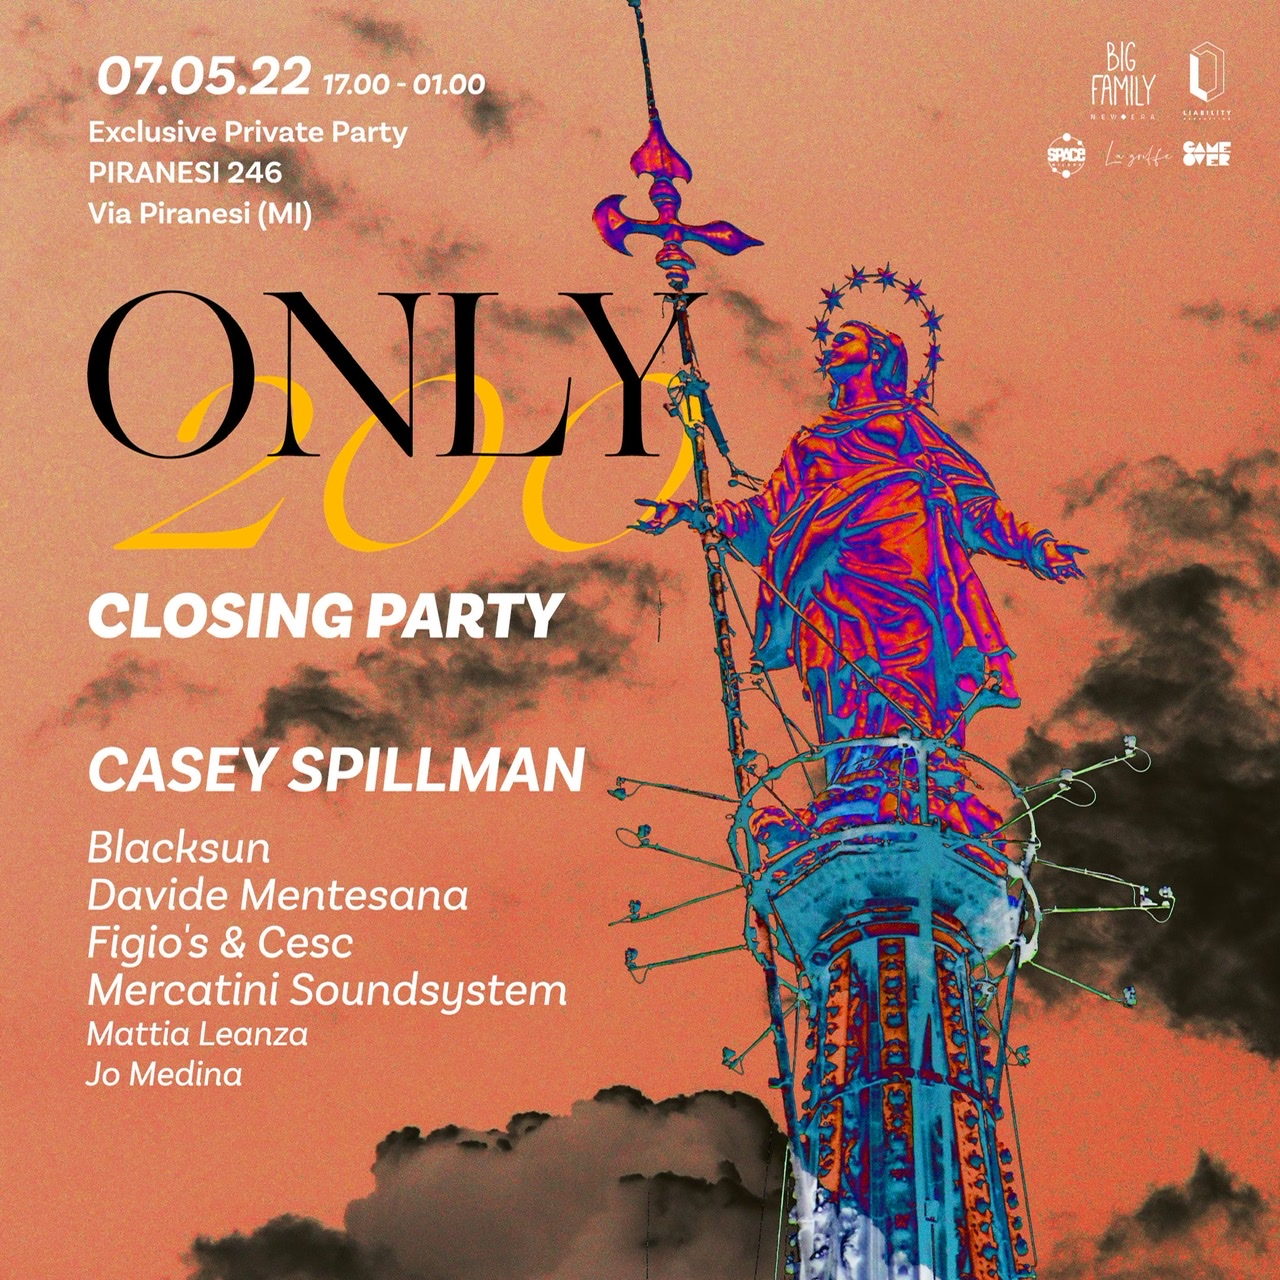 ONLY 200 - CLOSING PARTY